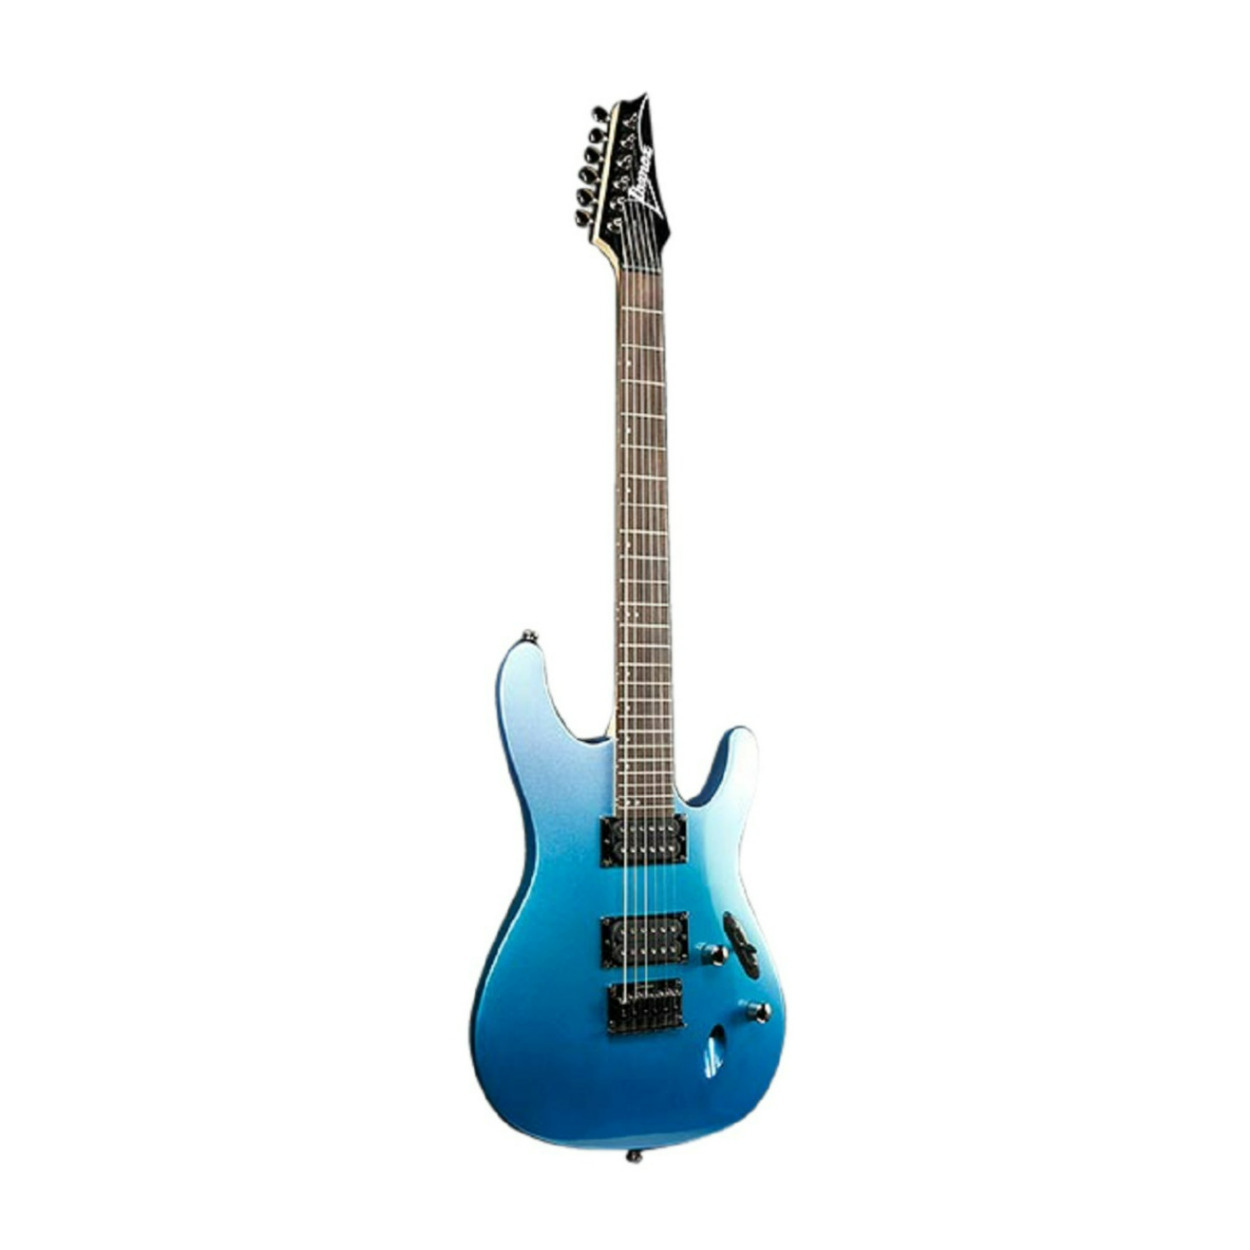 Ibanez S521 Standard 6-String Electric Guitar (Ocean Fade Metallic, Right-Handed) -  S521OFM